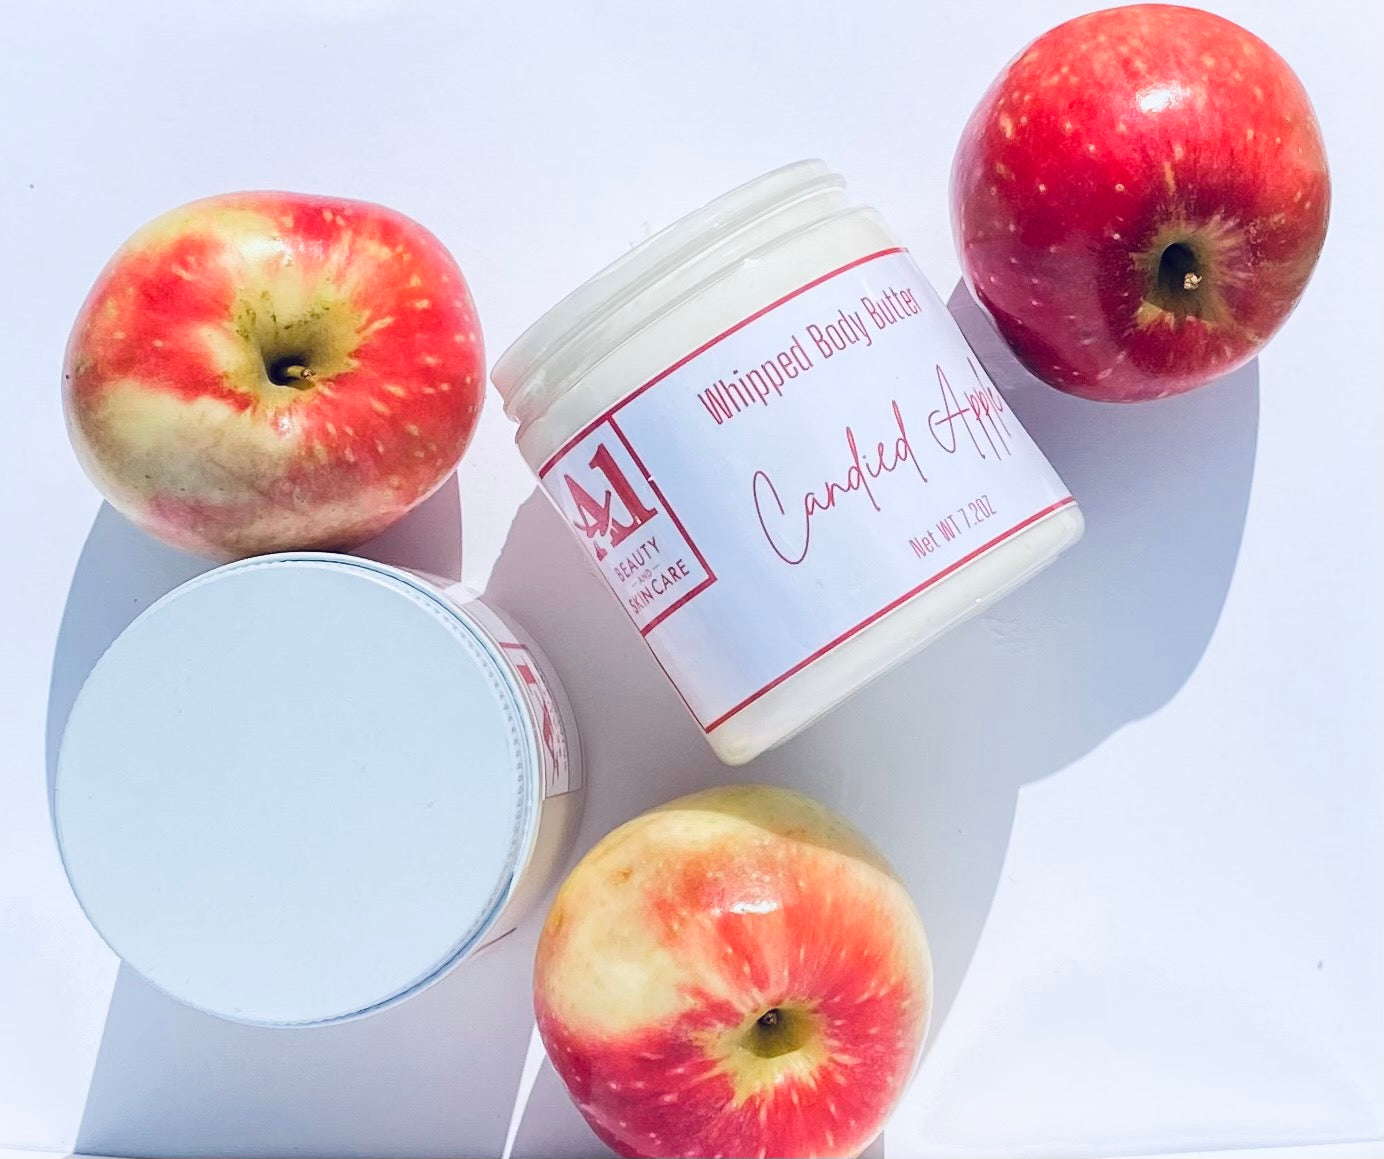 “Candied Apple” body butter A1 Beauty & Skincare.